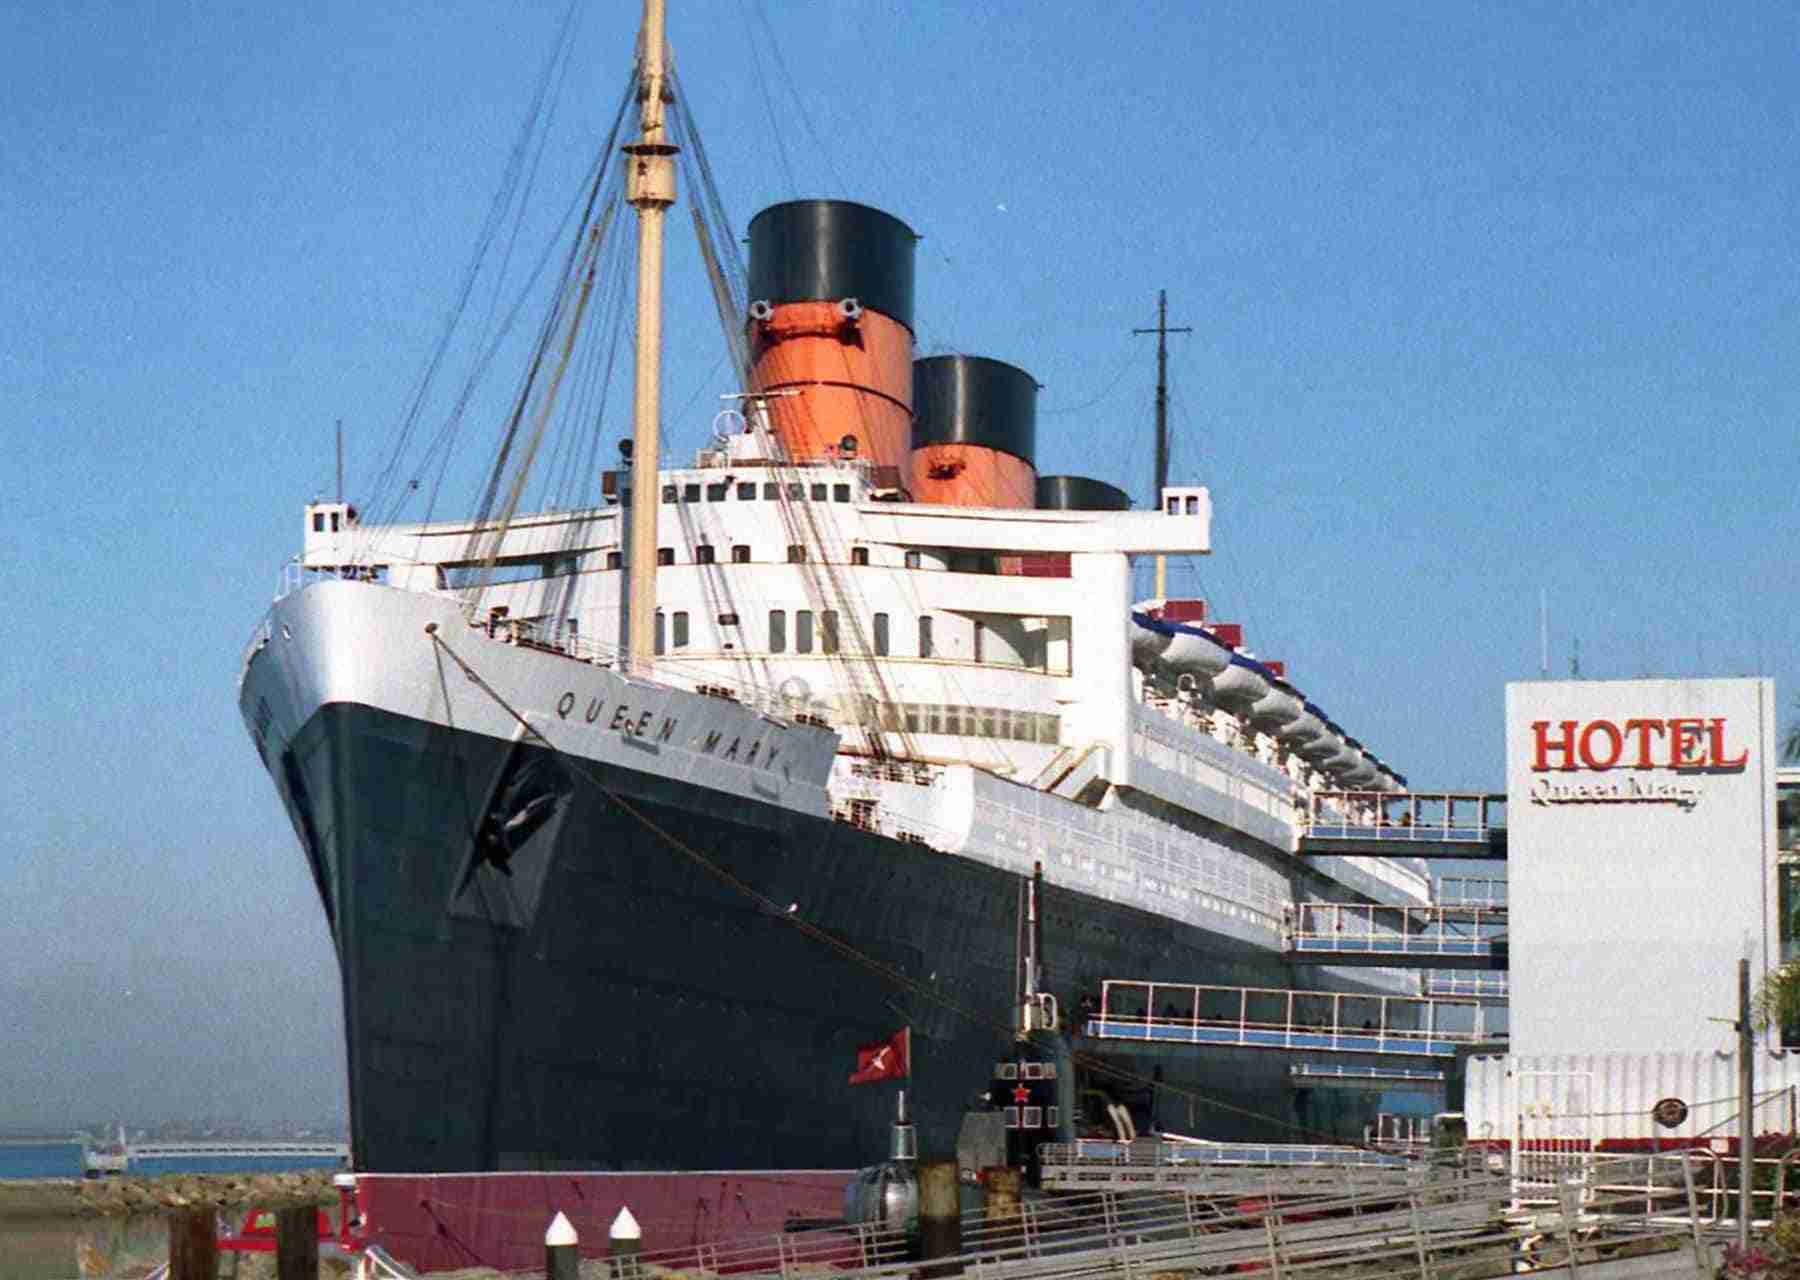 Spend your Valentines on the Queen Mary